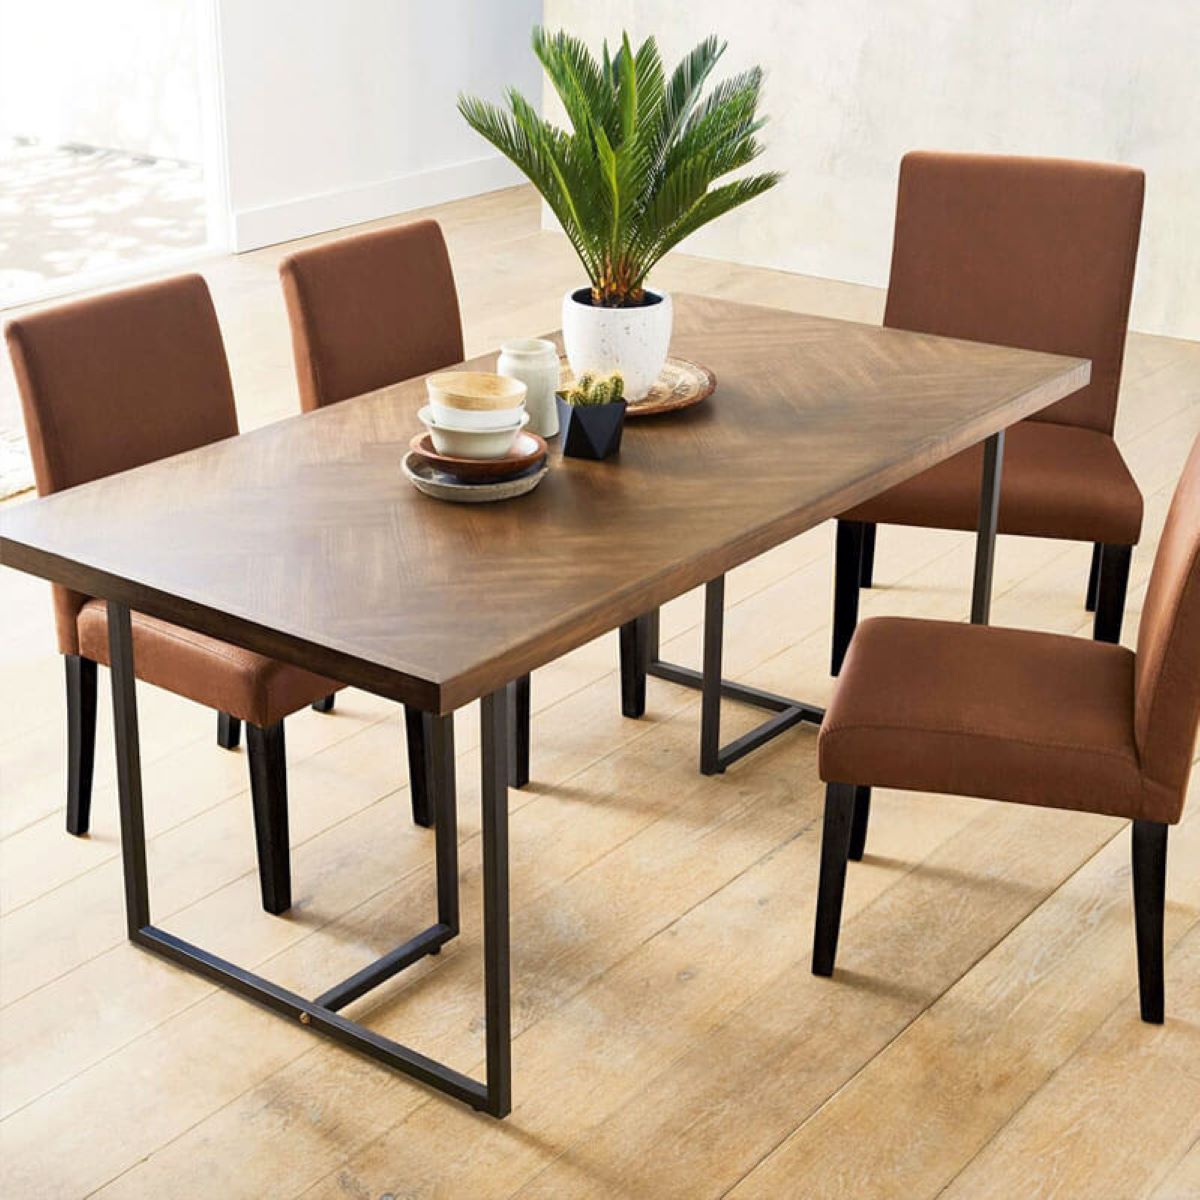 How Wide Is A Typical Dining Room Table | Storables